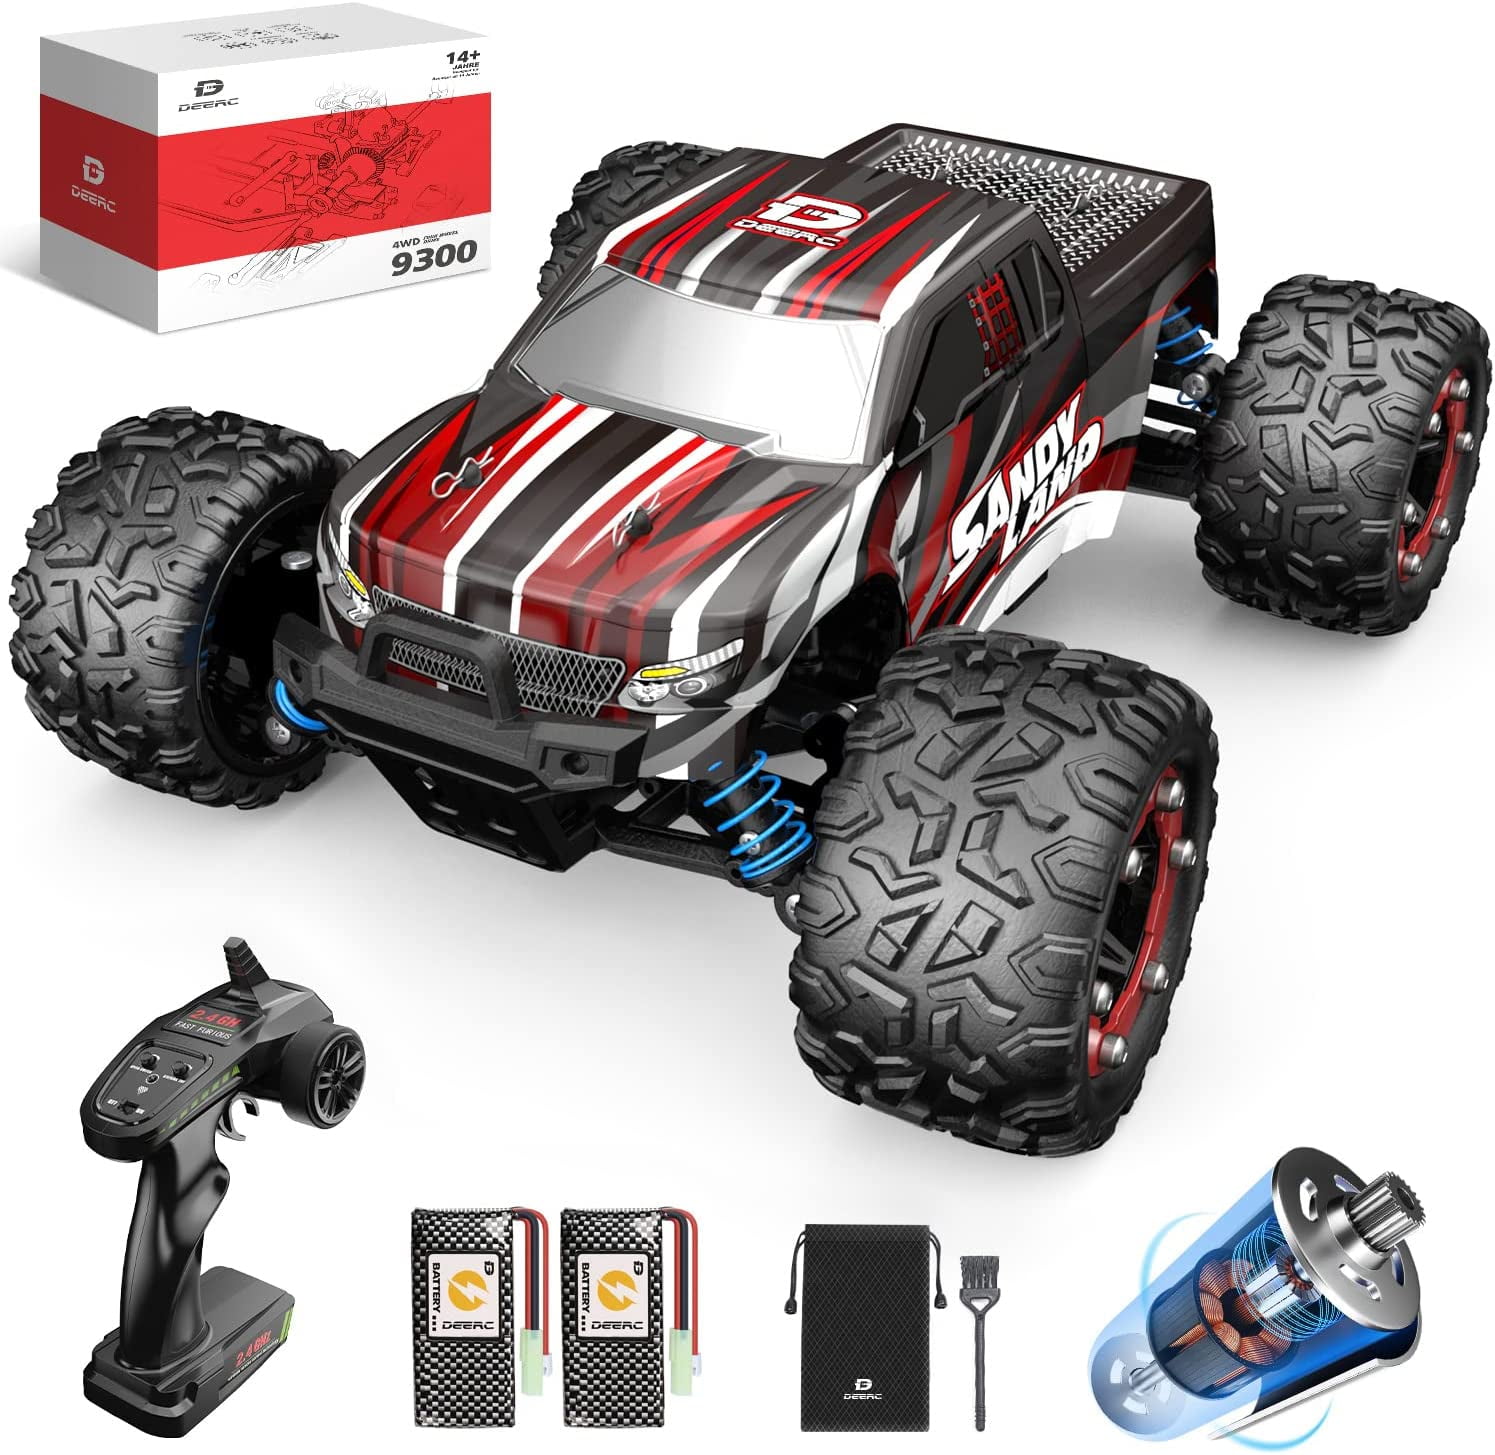 Hobbyist Grade for Adults Waterproof Drift Off-Road High Speed Remote Control Car with Two Rechargeable Batteries TizzyToy Remote Control Car 1:18 Scale 45Km/h 4WD RC Car Toy Gift for Boys Girls 